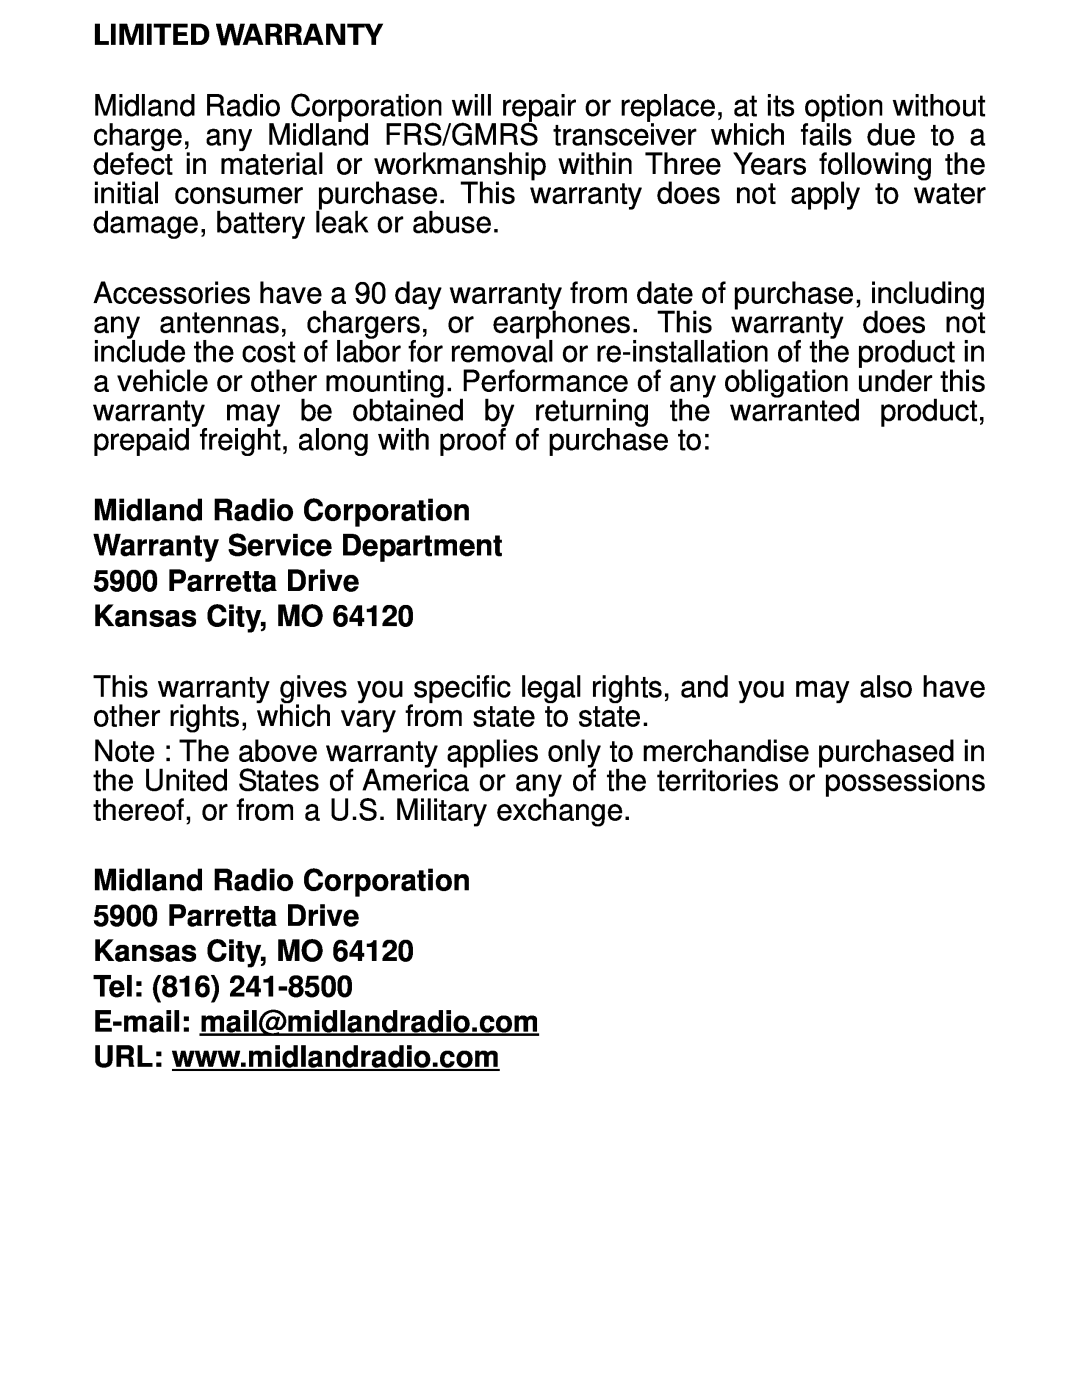 Midland Radio LXT112 Series owner manual Limited Warranty, Midland Radio Corporation Warranty Service Department 